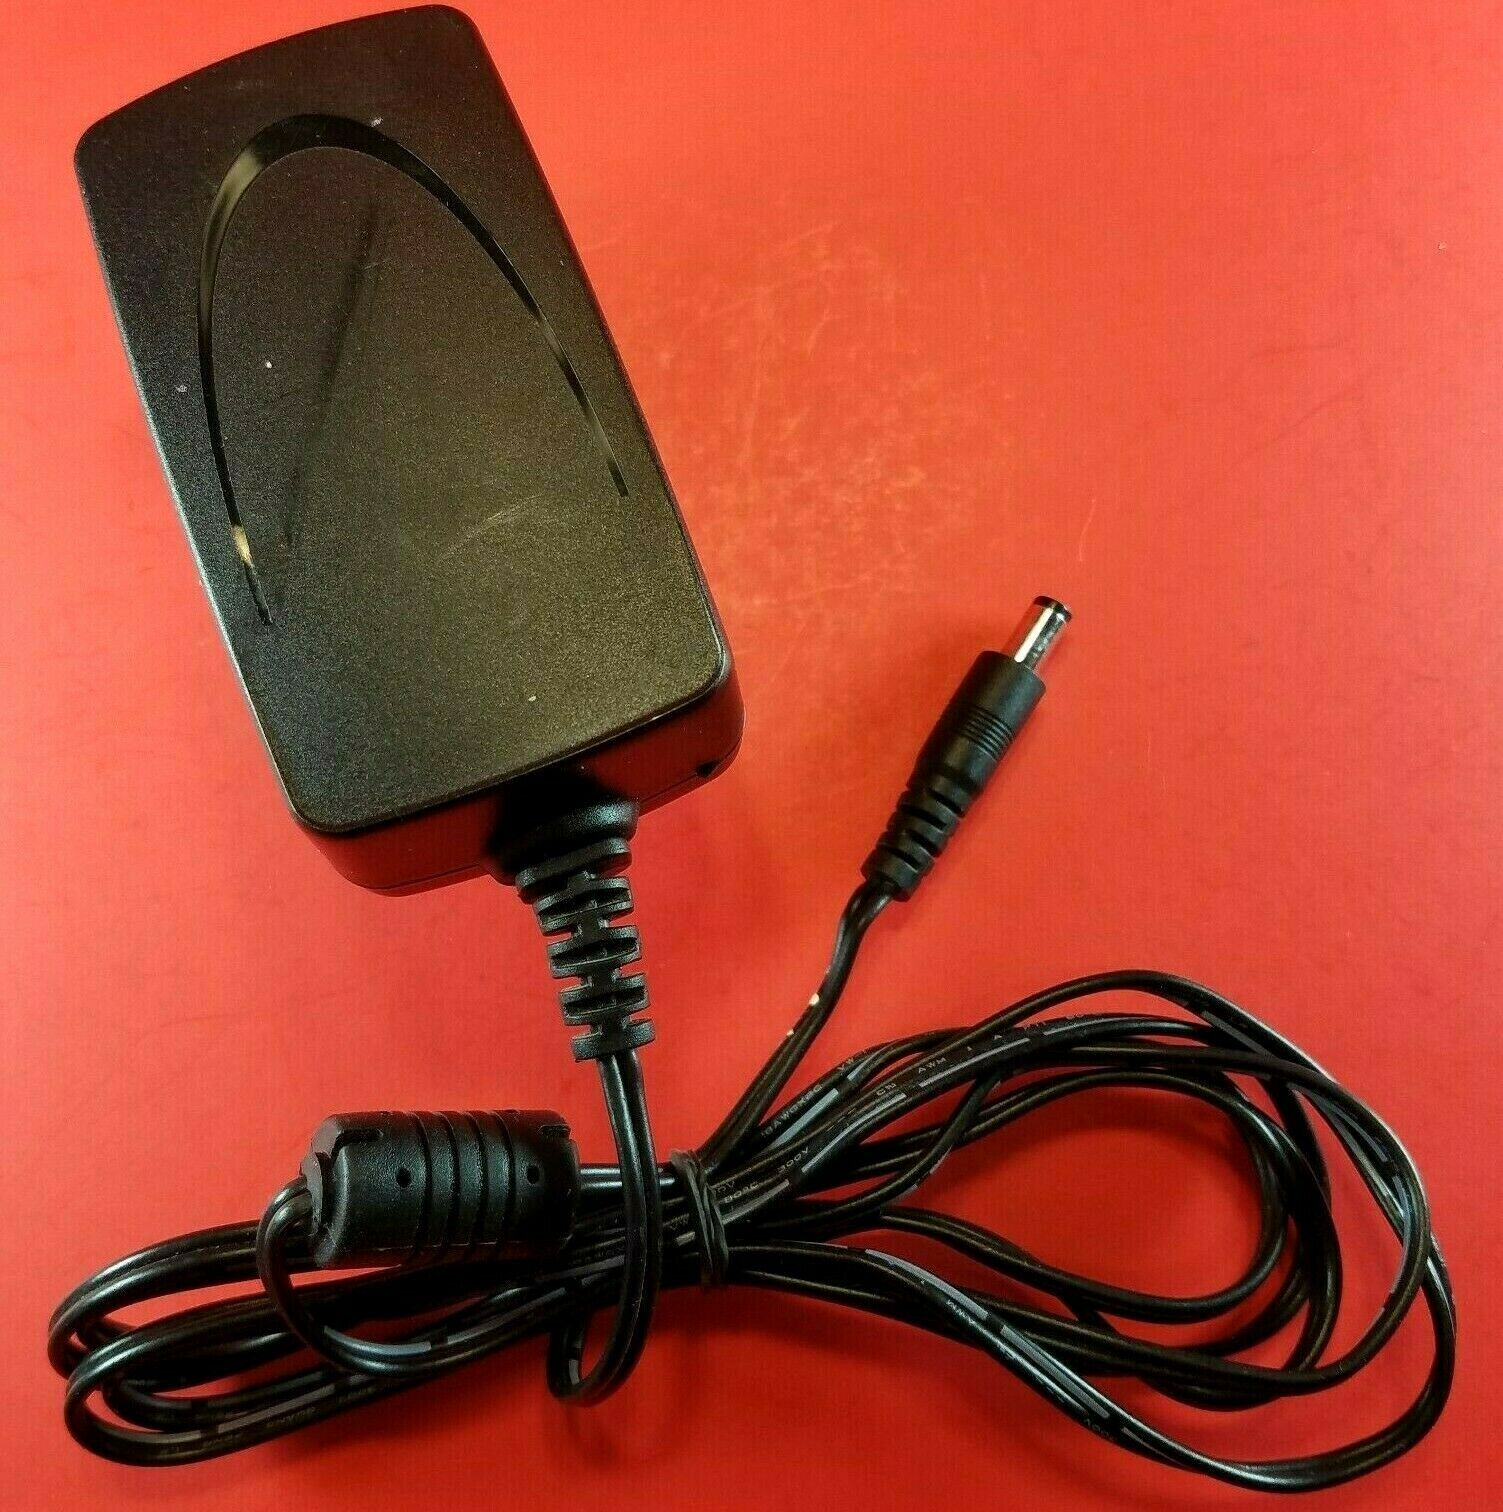 AC Adapter 5V 2A for Yealink VoIP Phones T20 T21 T22 T26 T28 T46G T42G T46S T48S Model: T4x, T5x Features: Speakerph